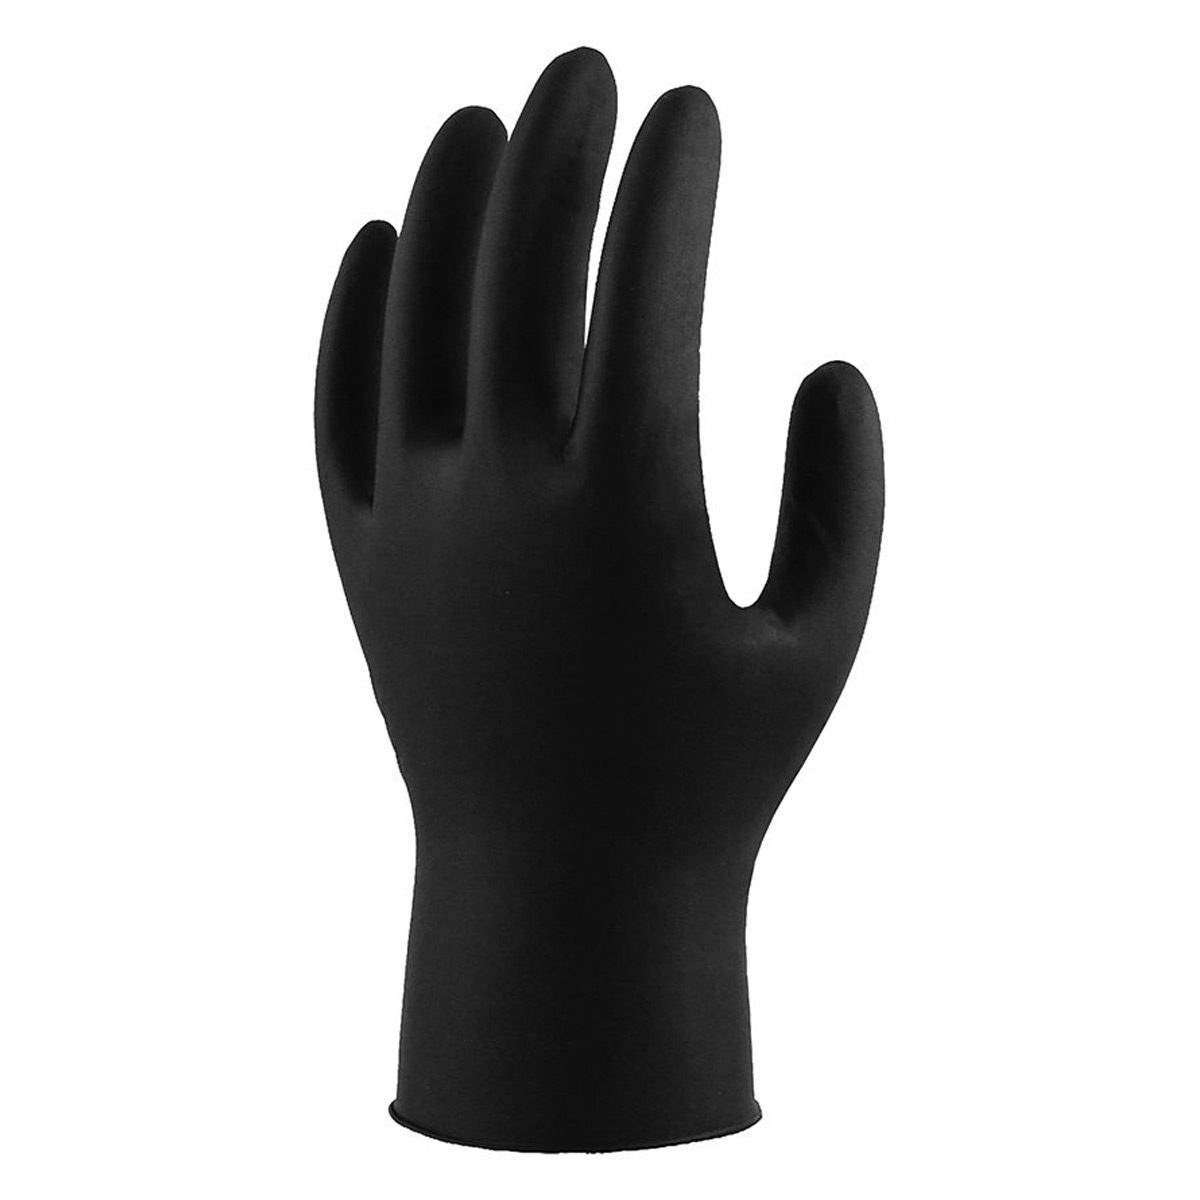 consumables-hospitality-gloves-grizzly-nitrile-black-grizzly-powderfree-workshop-glove-LARGE-100pk-textured-non-allergenic-chemical-resistant-non-sterile-ambidextrous-vjs-distributors-GLOVEBNL